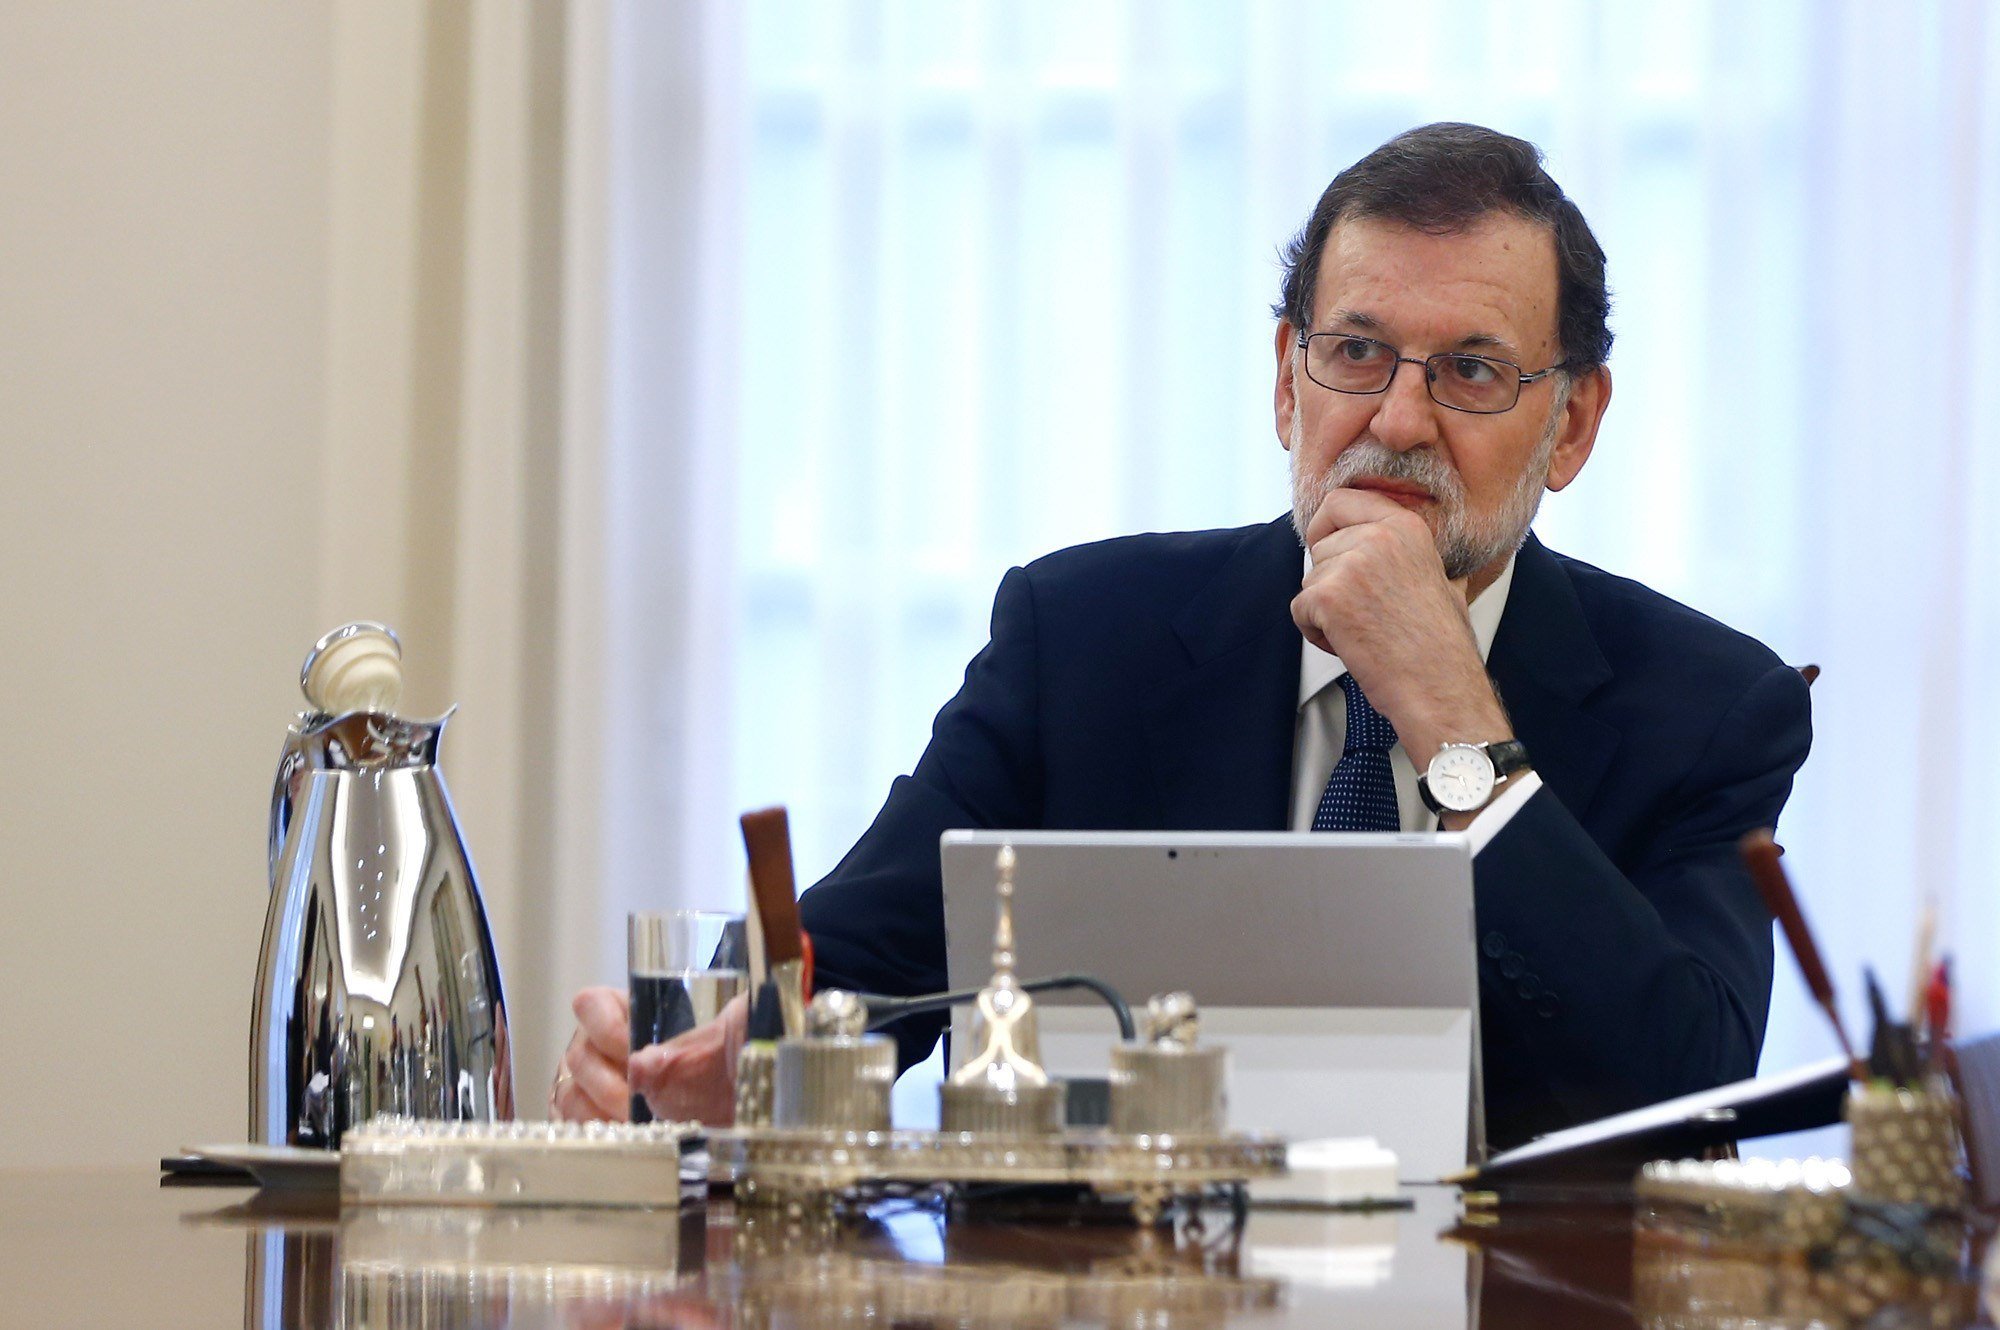 Rajoy gives Puigdemont a deadline of Monday to respond